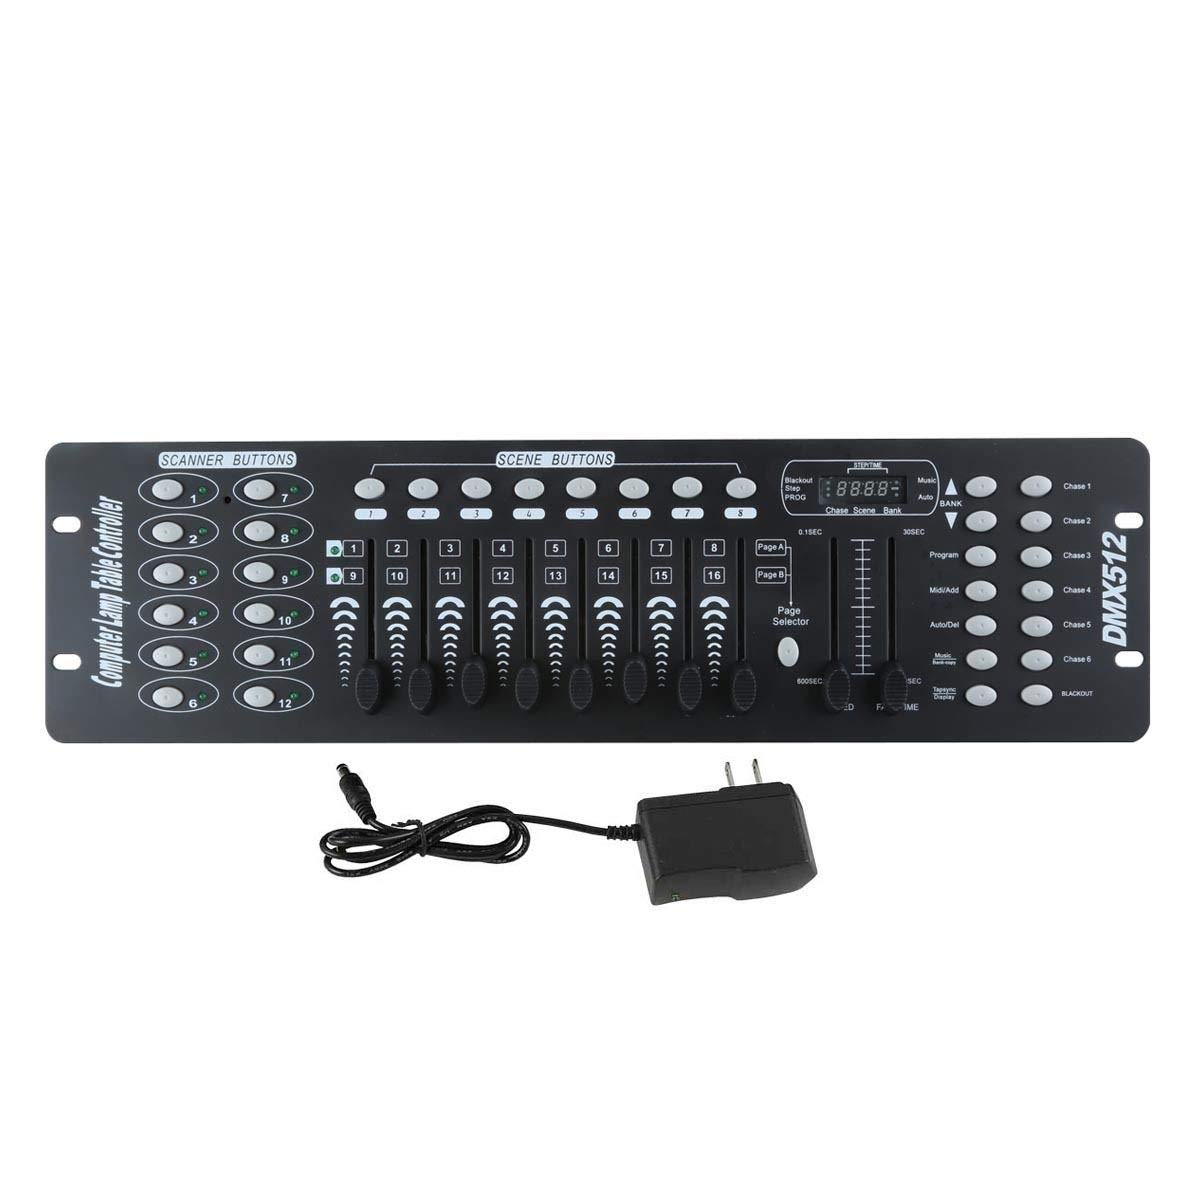 TC-Home 192 Channels Console DMX512 Controller DJ Operator Equipment for Stage Lighting Party